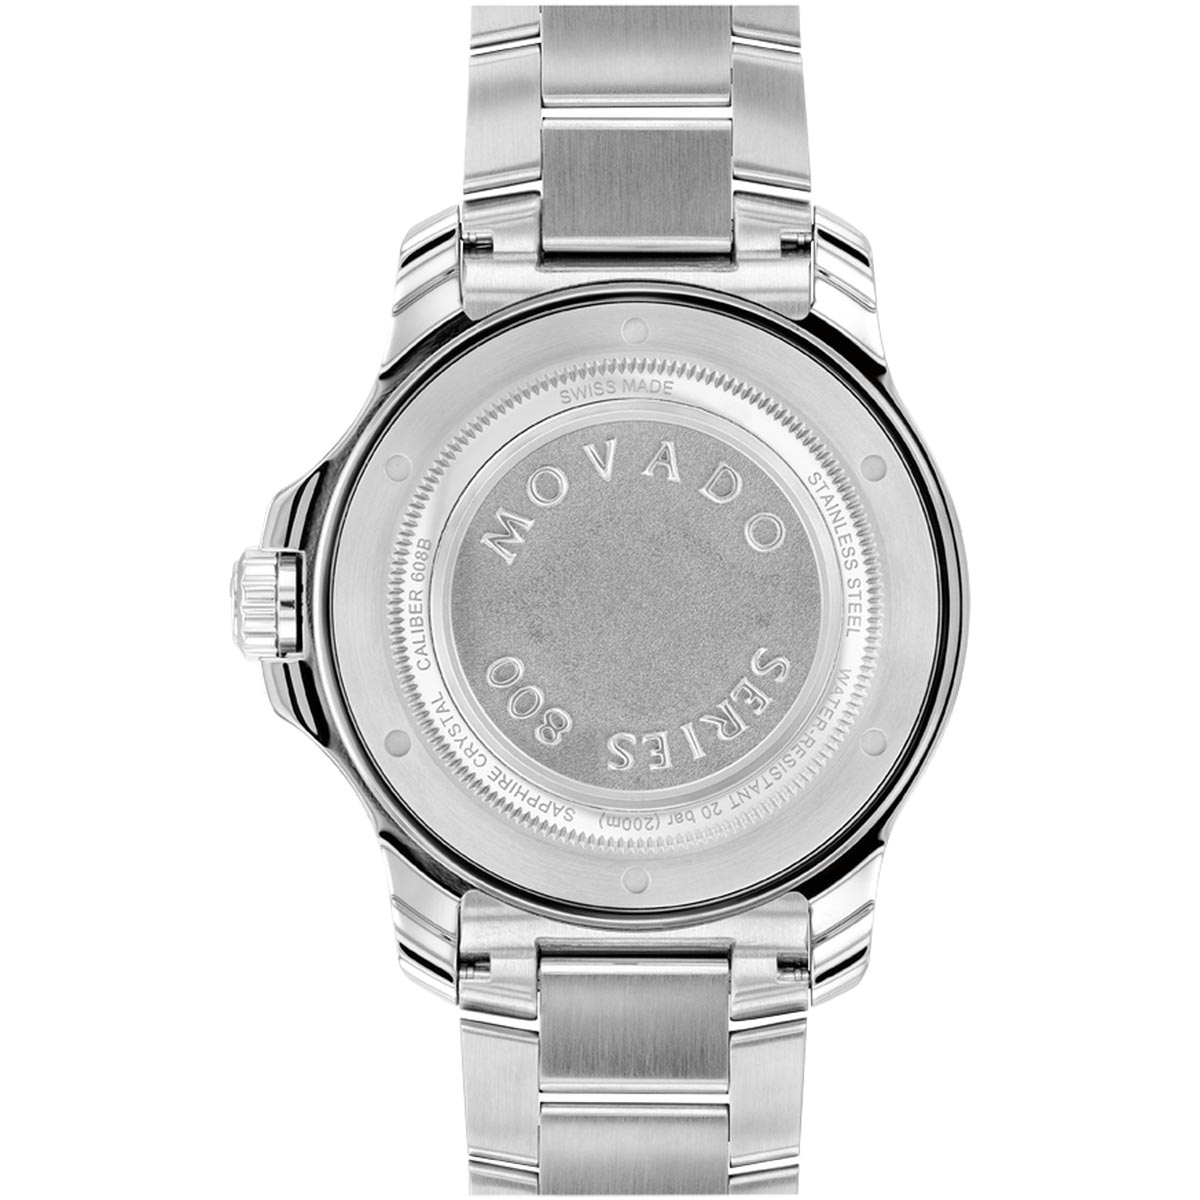 Movado Series 800 Mens Watch with Black Dial and Stainless Steel Bracelet (automatic movement)